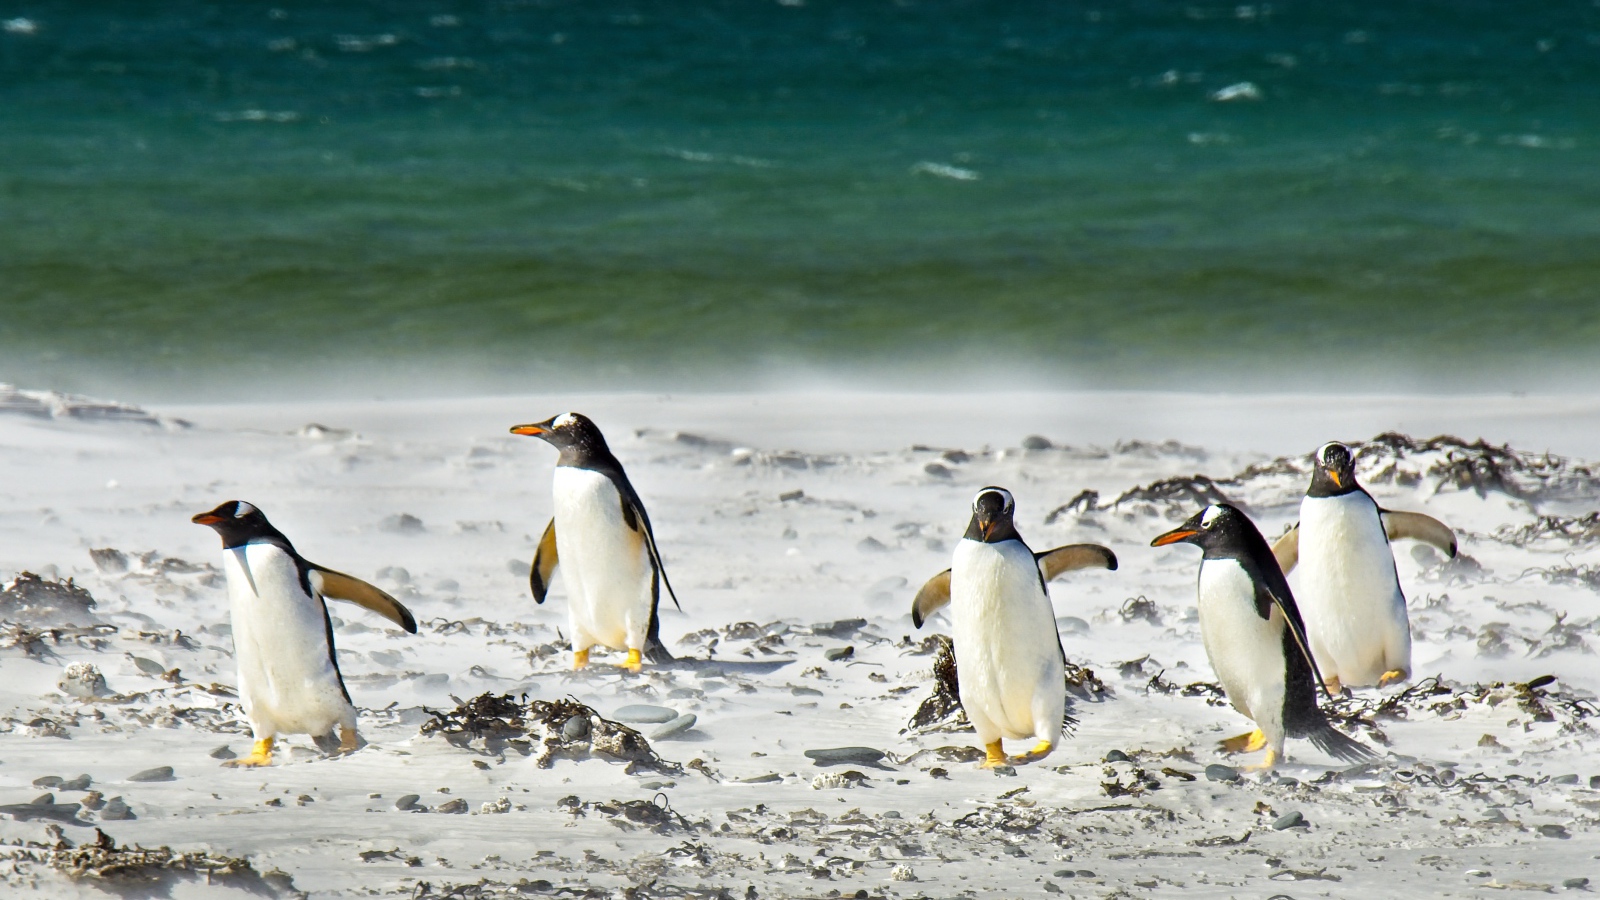 A flock of penguins in the snow by the sea